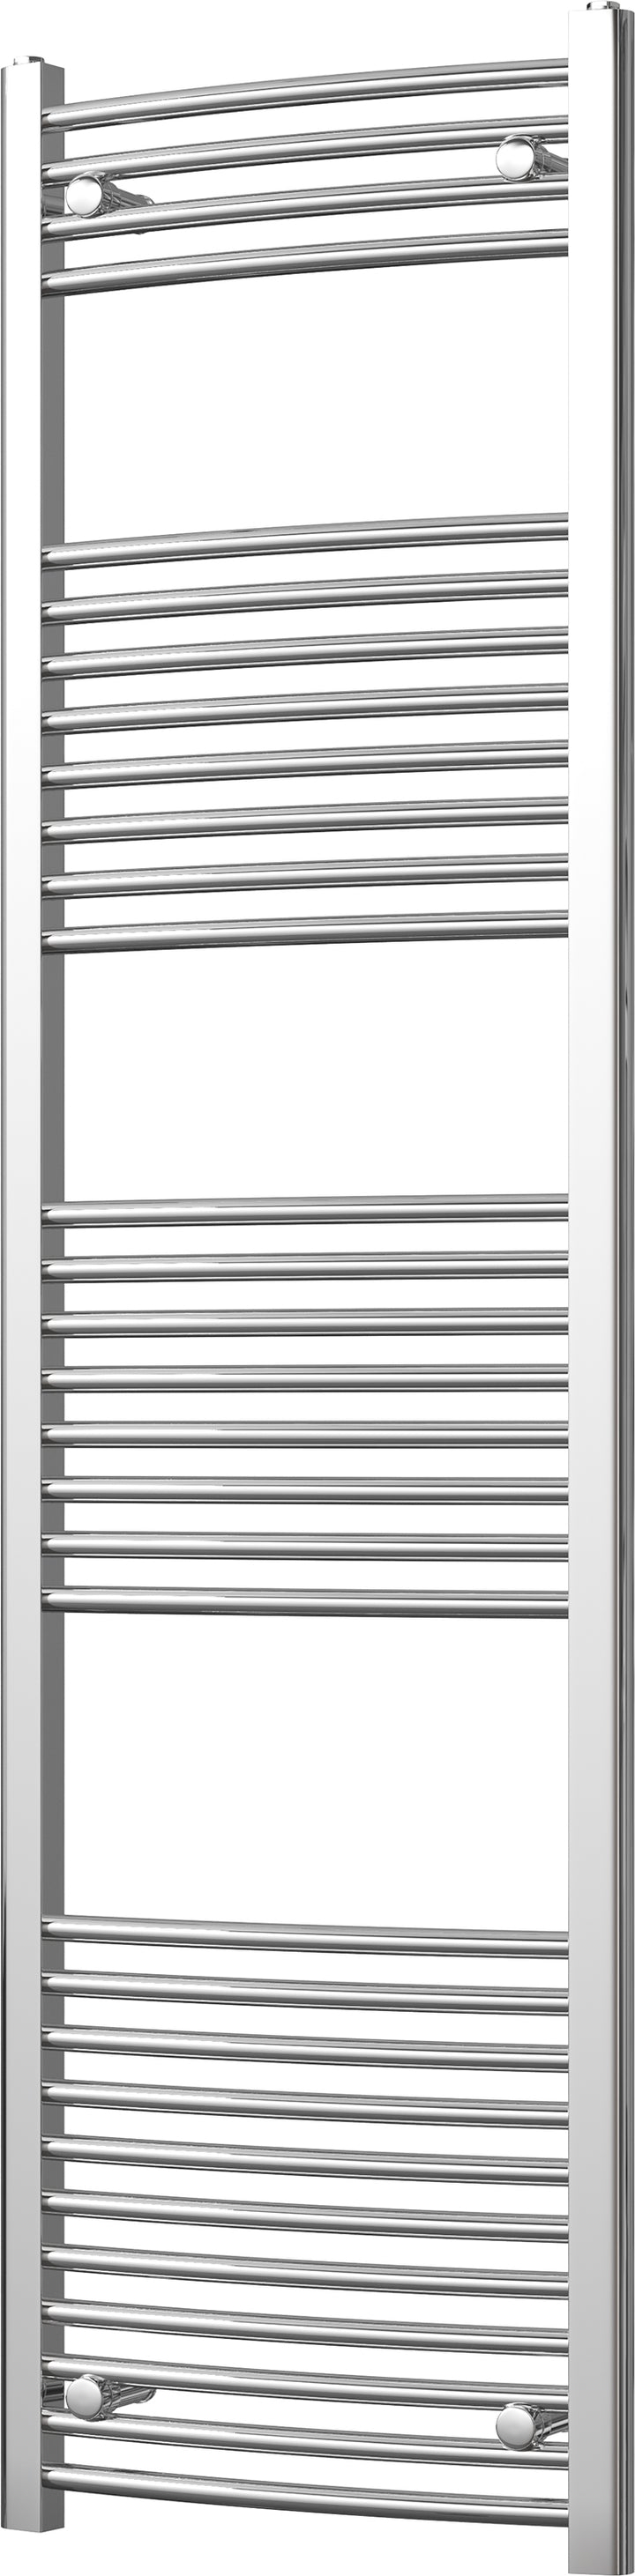 Zennor - Chrome Heated Towel Rail - H1800mm x W500mm - Curved